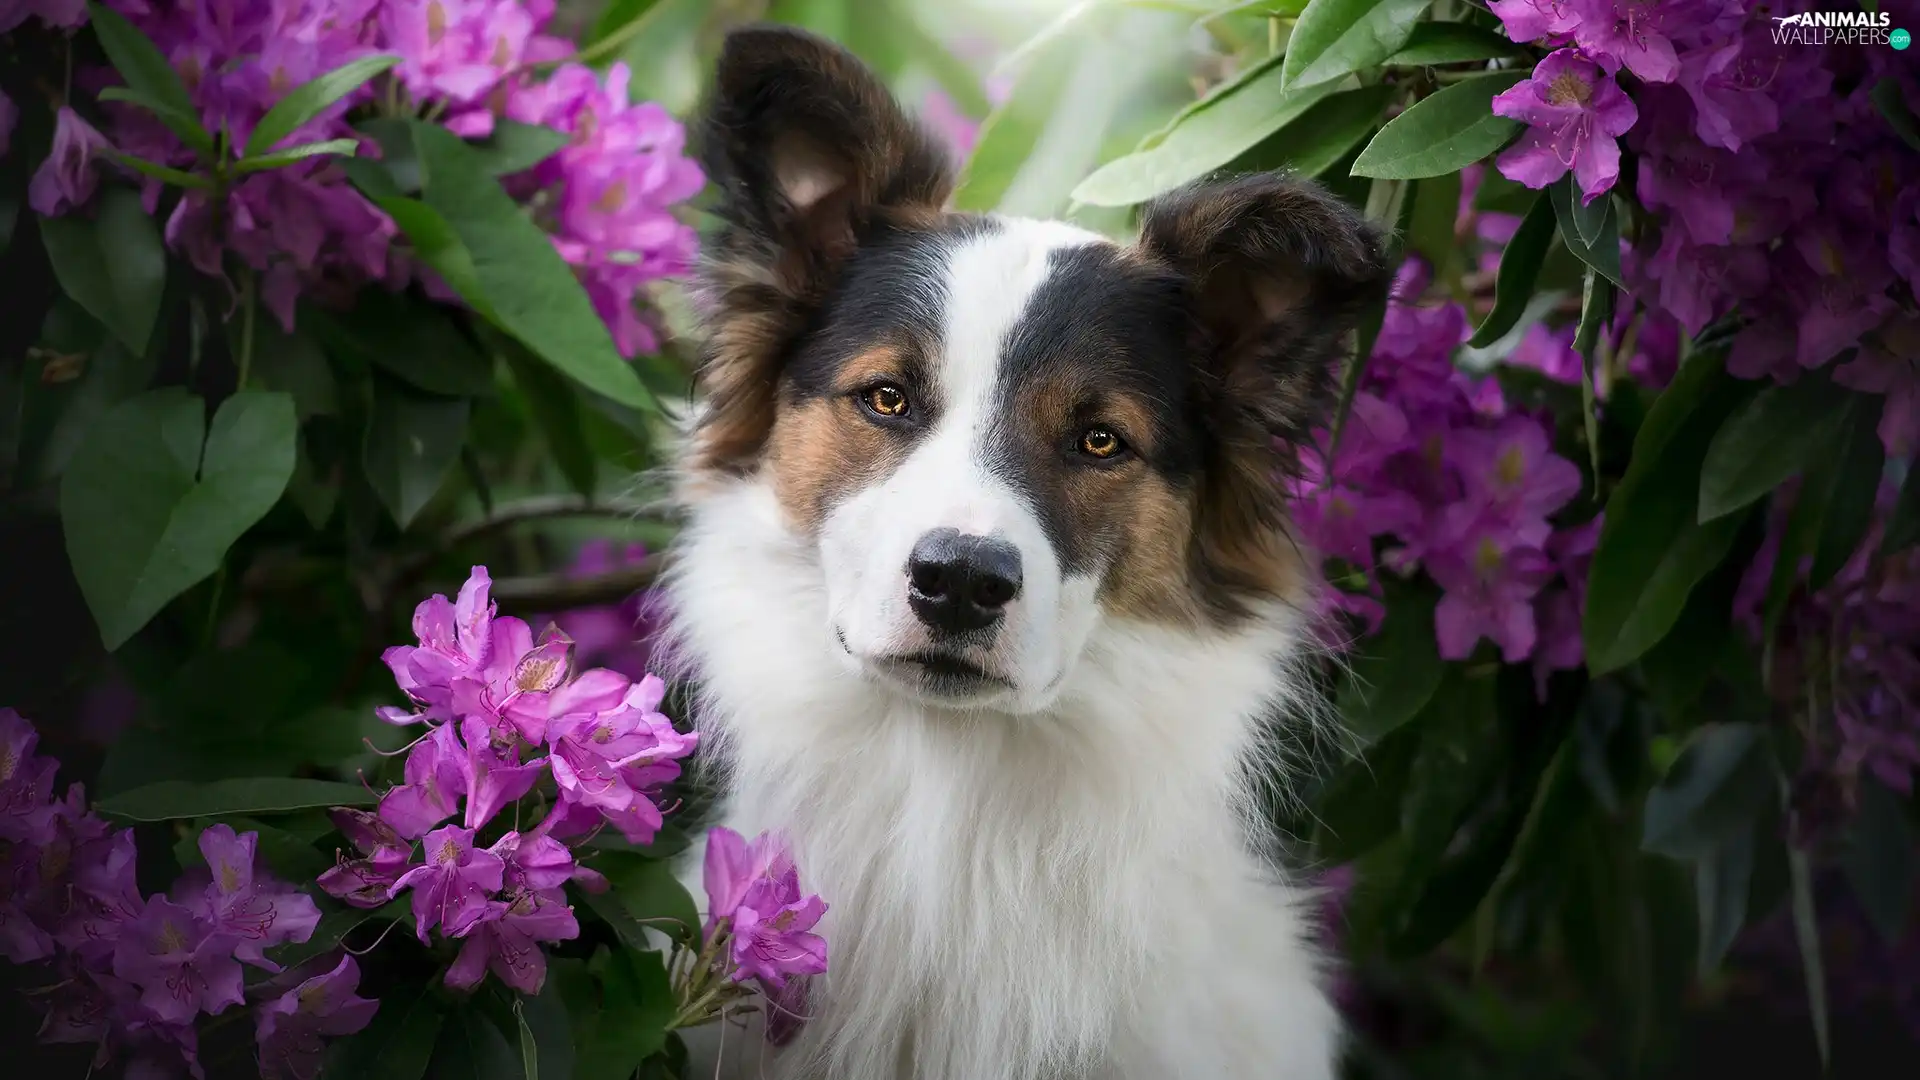 Rhododendrons, Leaf, muzzle, Flowers, dog